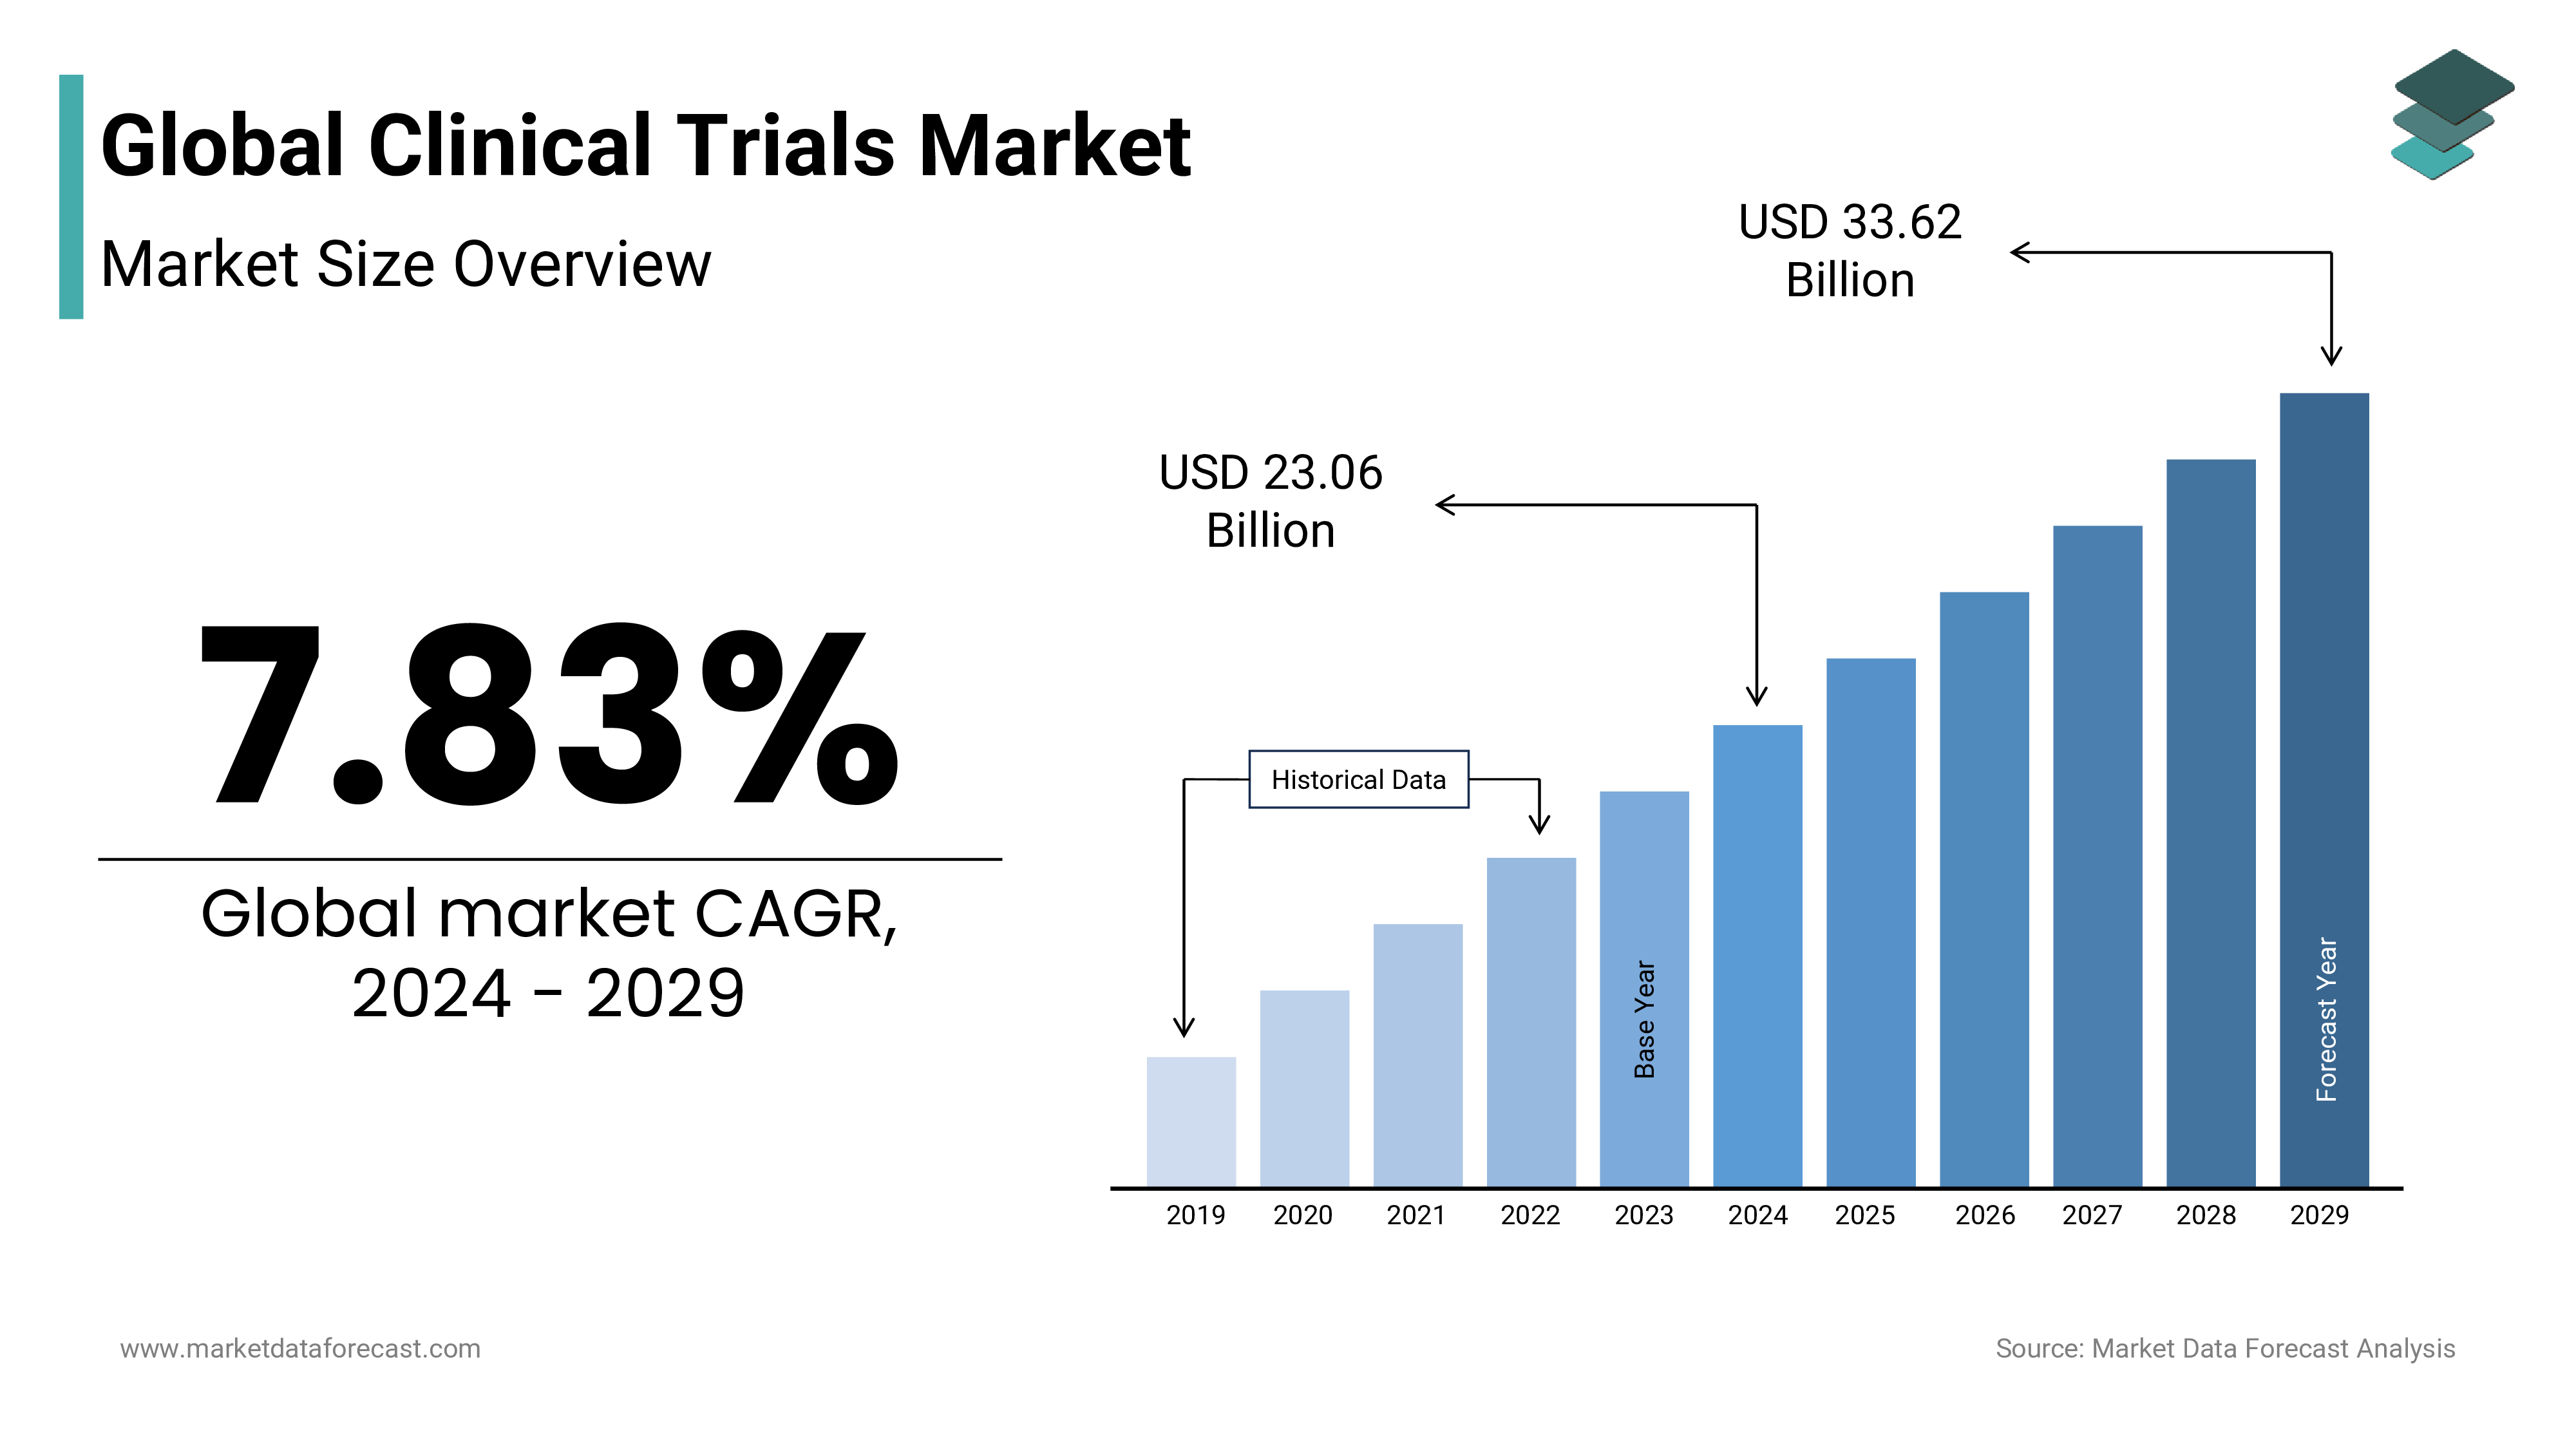 The global clinical trials market expected to witness a significant growth rate of 7.83% by 2029